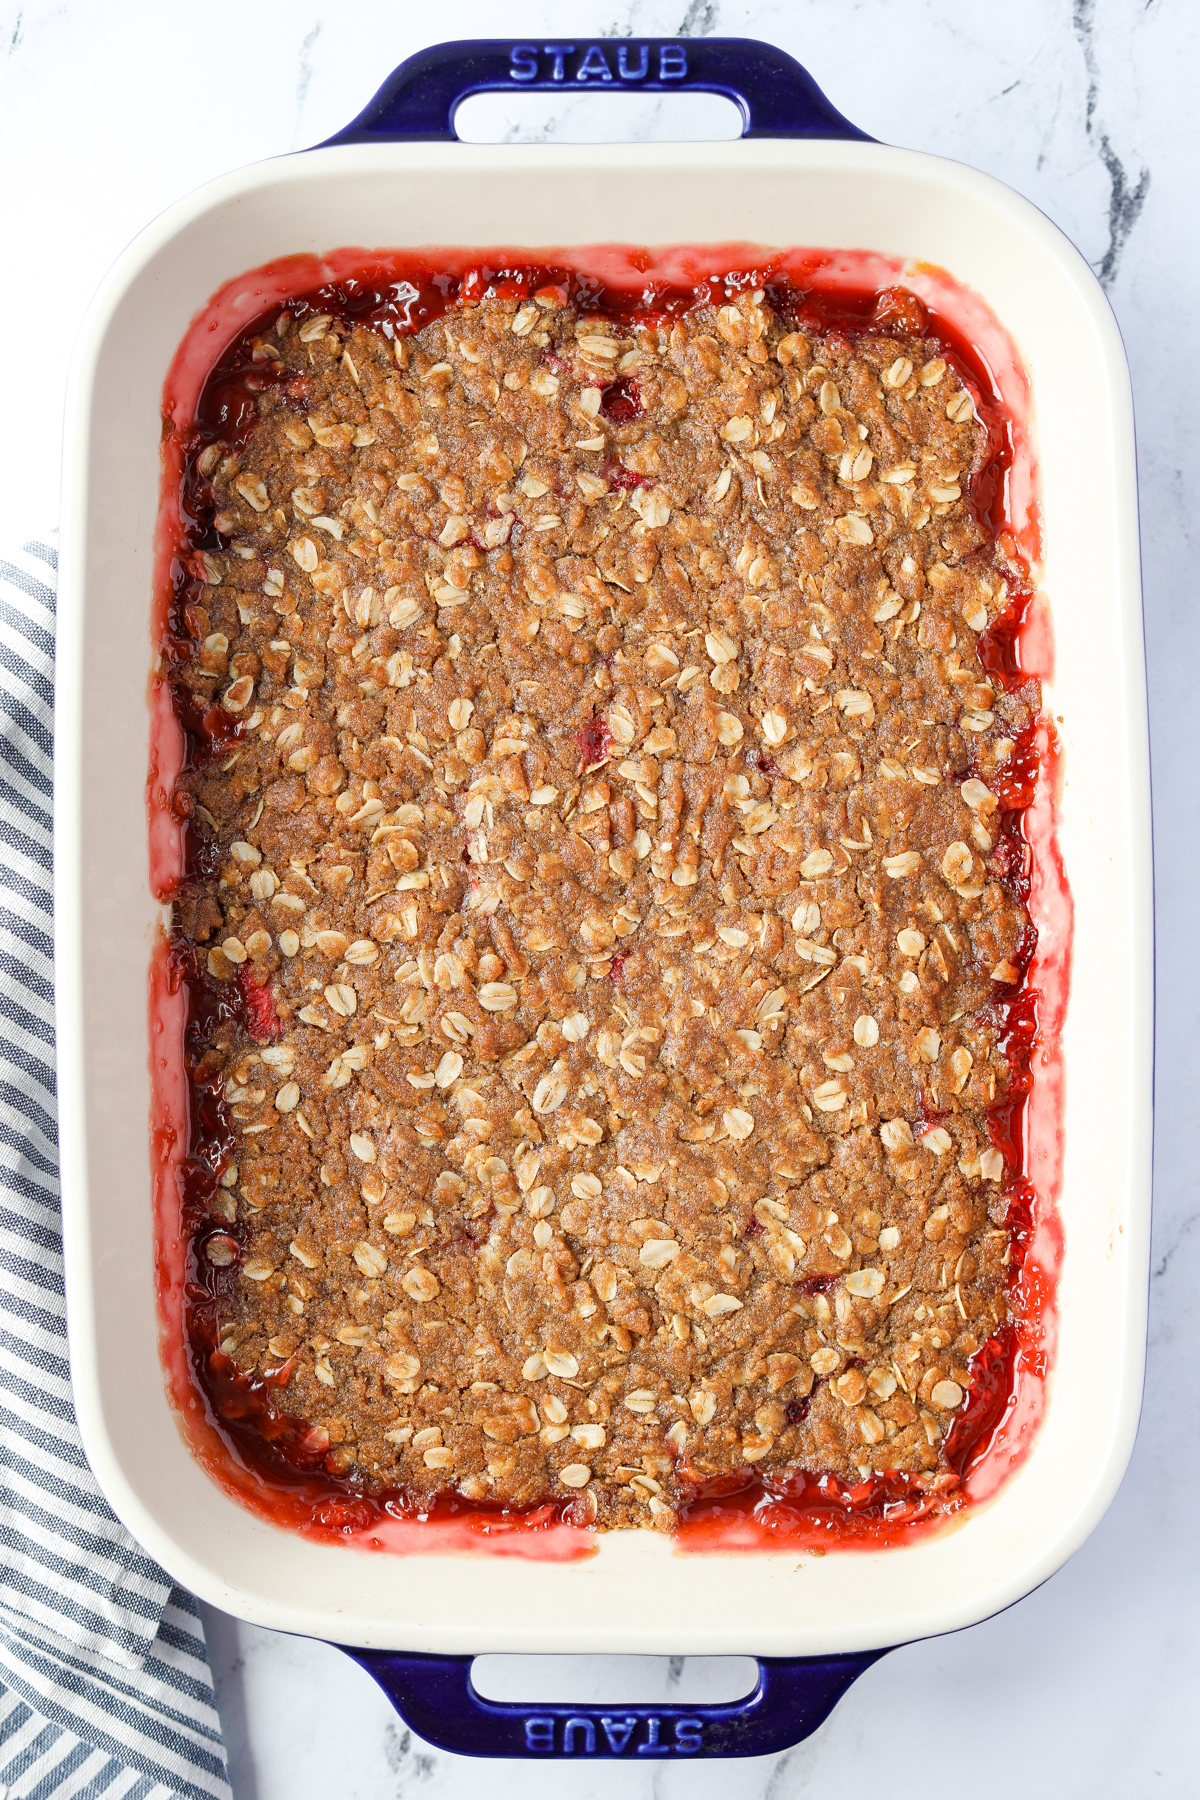 A baking dish with a strawberry and rhubarb fruit crisp baked inside.